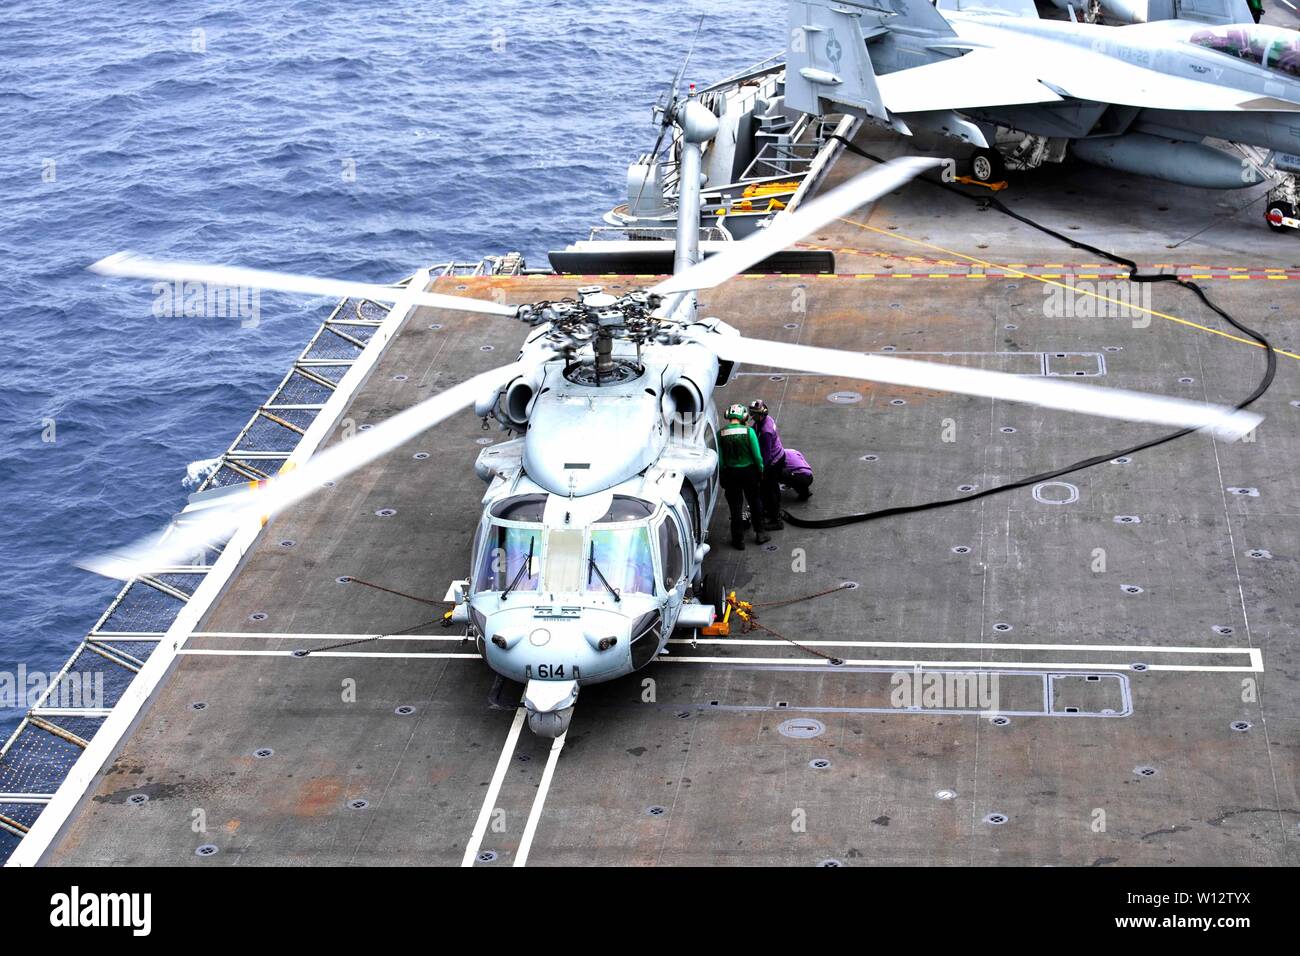 190627-N-HA101-0388 PACIFIC OCEAN (June 27, 2019) Sailors fuel an MH-60S Sea Hawk helicopter assigned to the “Indians” of Helicopter Sea Combat Squadron (HSC) 6 on the flight deck of the aircraft carrier USS Nimitz (CVN 68). Nimitz is currently underway conducting routine operations. (U.S. Navy photo by Mass Communication Specialist 3rd Class Jessica Tukes) Stock Photo